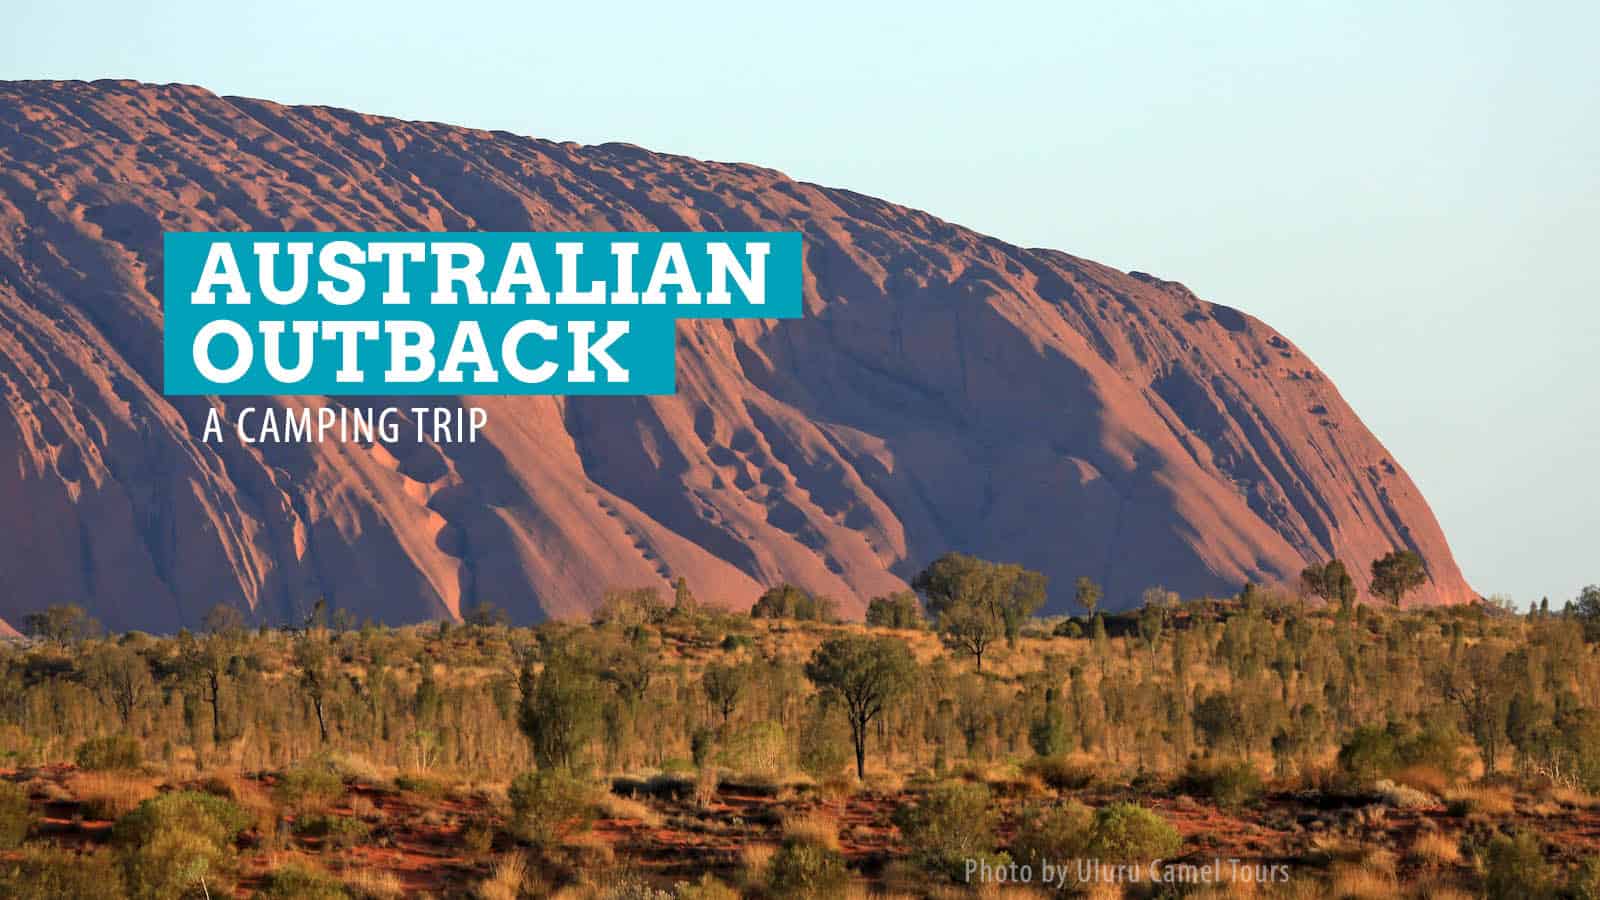 The Rock Tour: Camping Trip from Alice Springs to Uluru, Australia